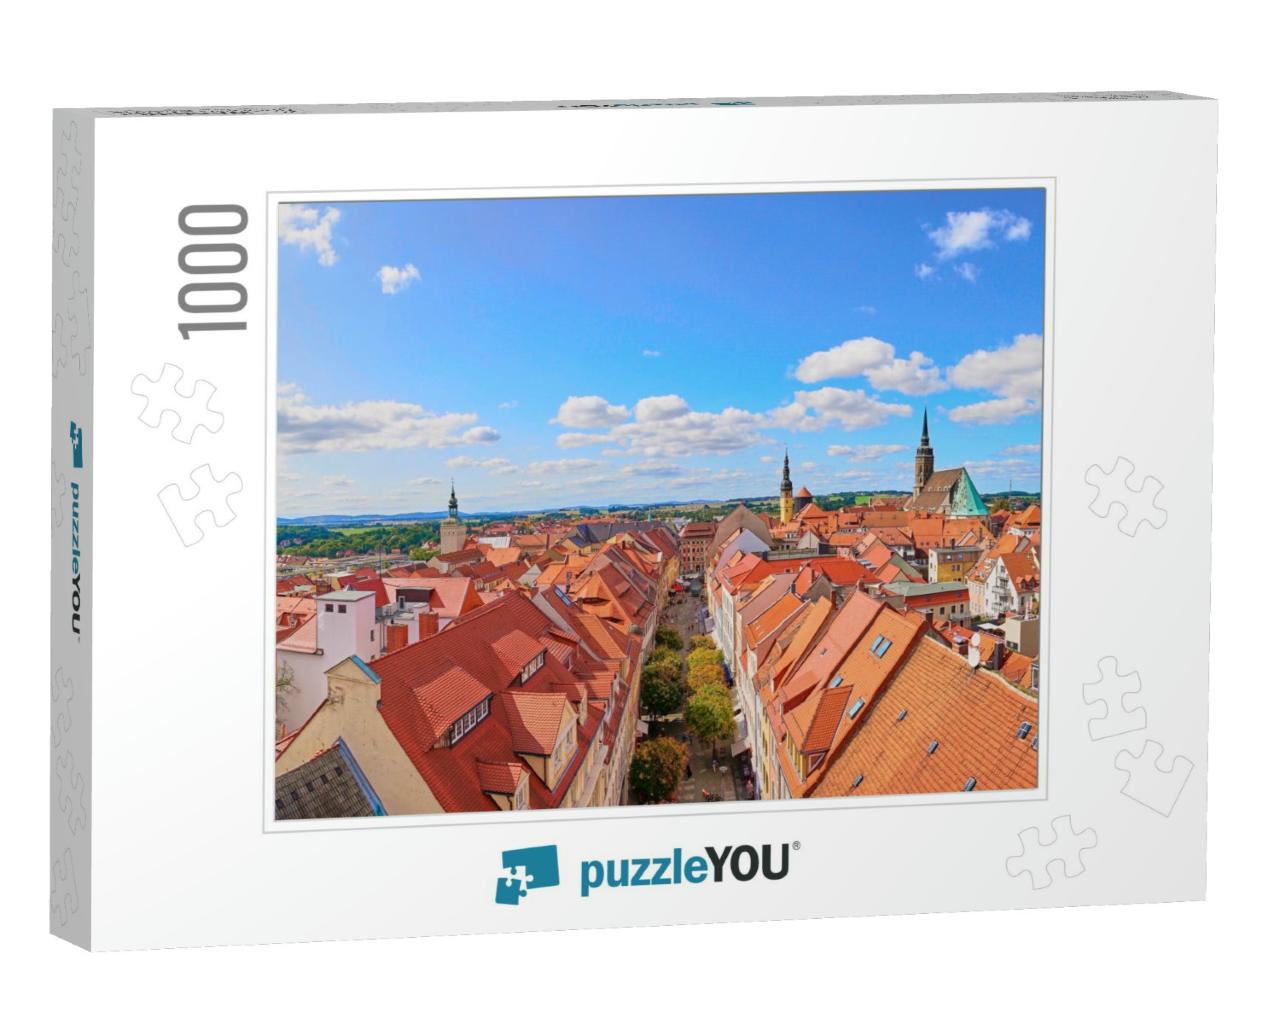 Cityscape of Downtown District of Bautzen, a Medieval Cit... Jigsaw Puzzle with 1000 pieces